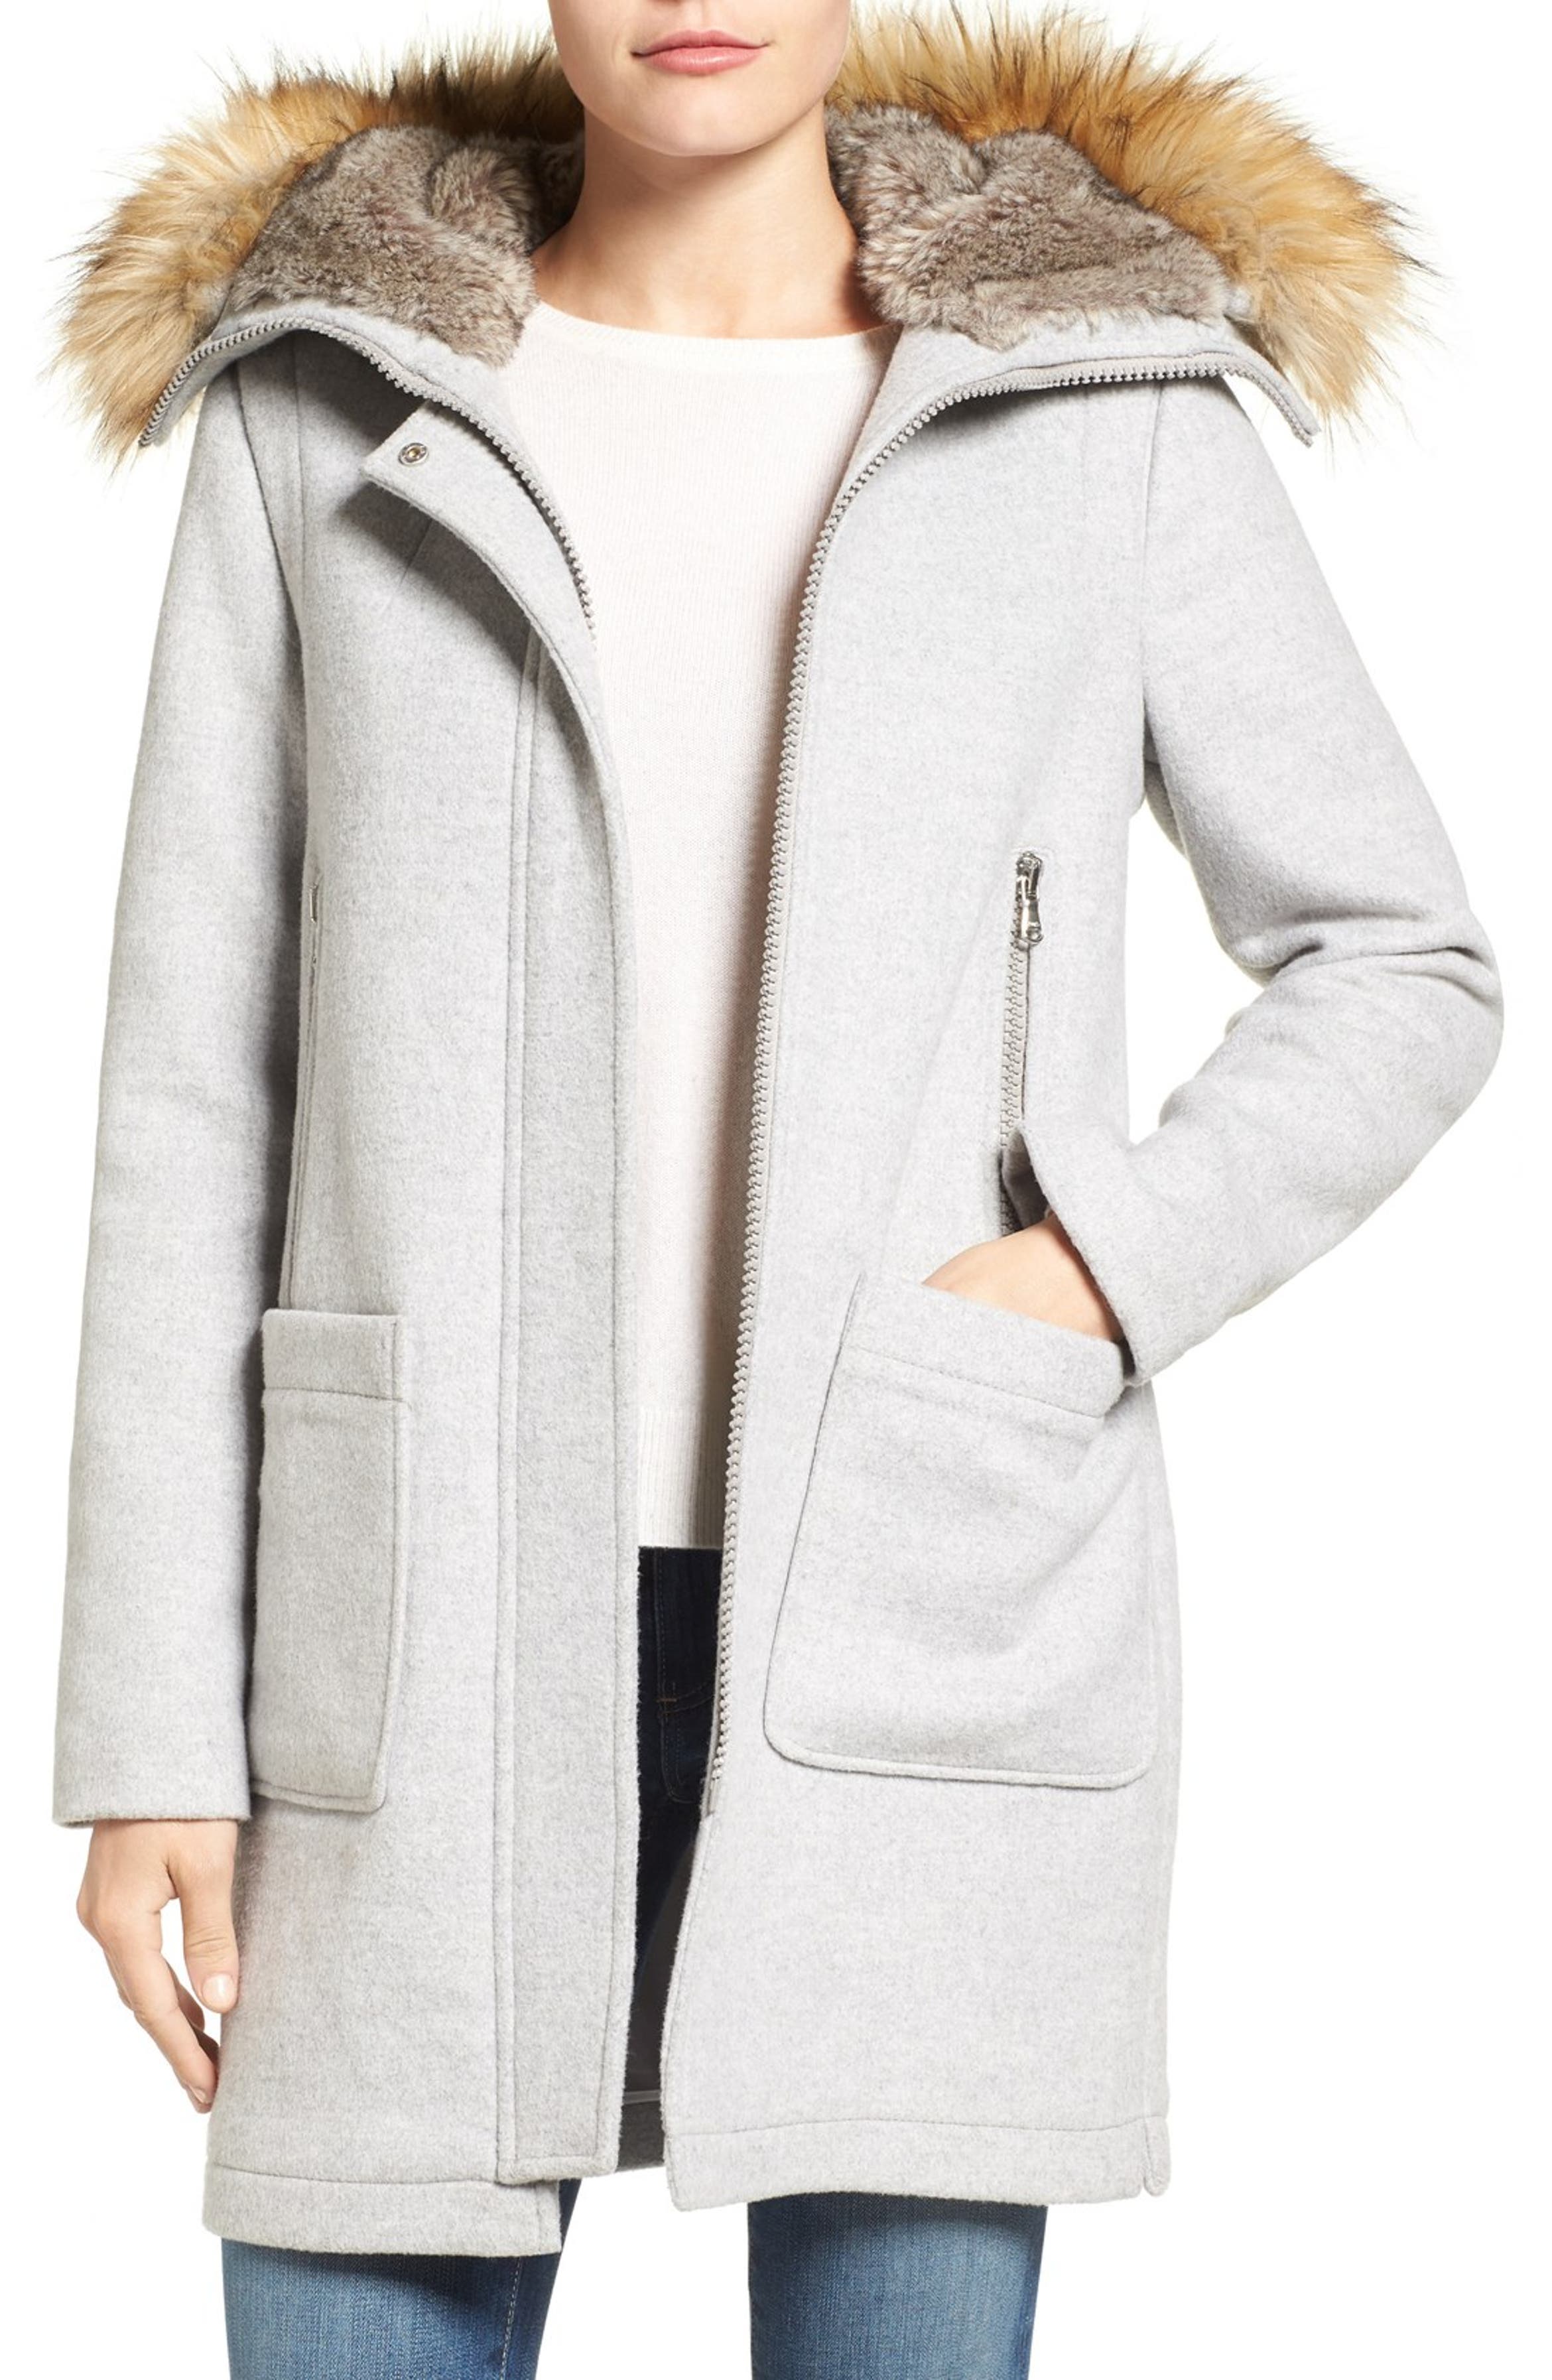 Vince Camuto Wool Blend Duffle Coat with Faux Fur Trim Hood | Nordstrom